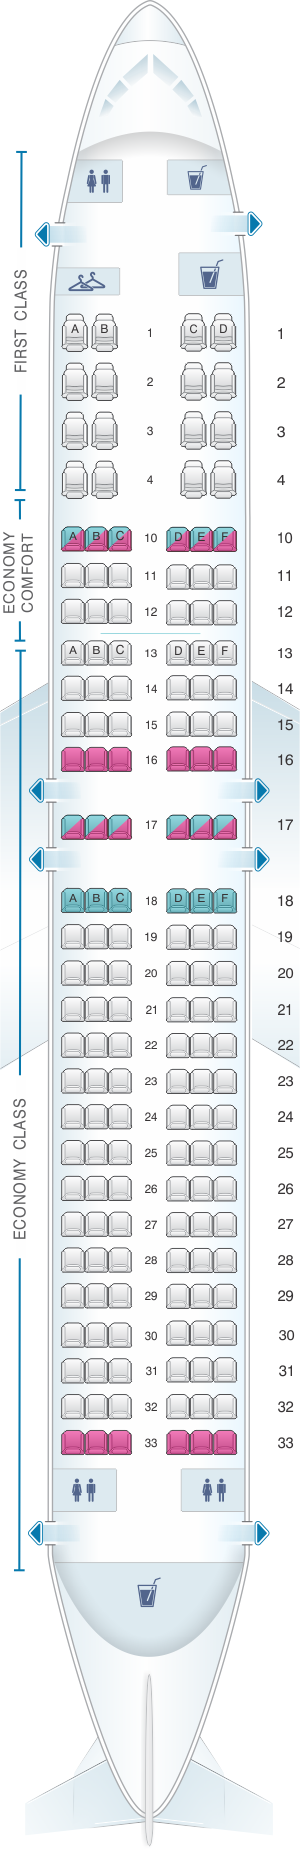 Seat map for Delta Air Lines Boeing B737 800 (73H)